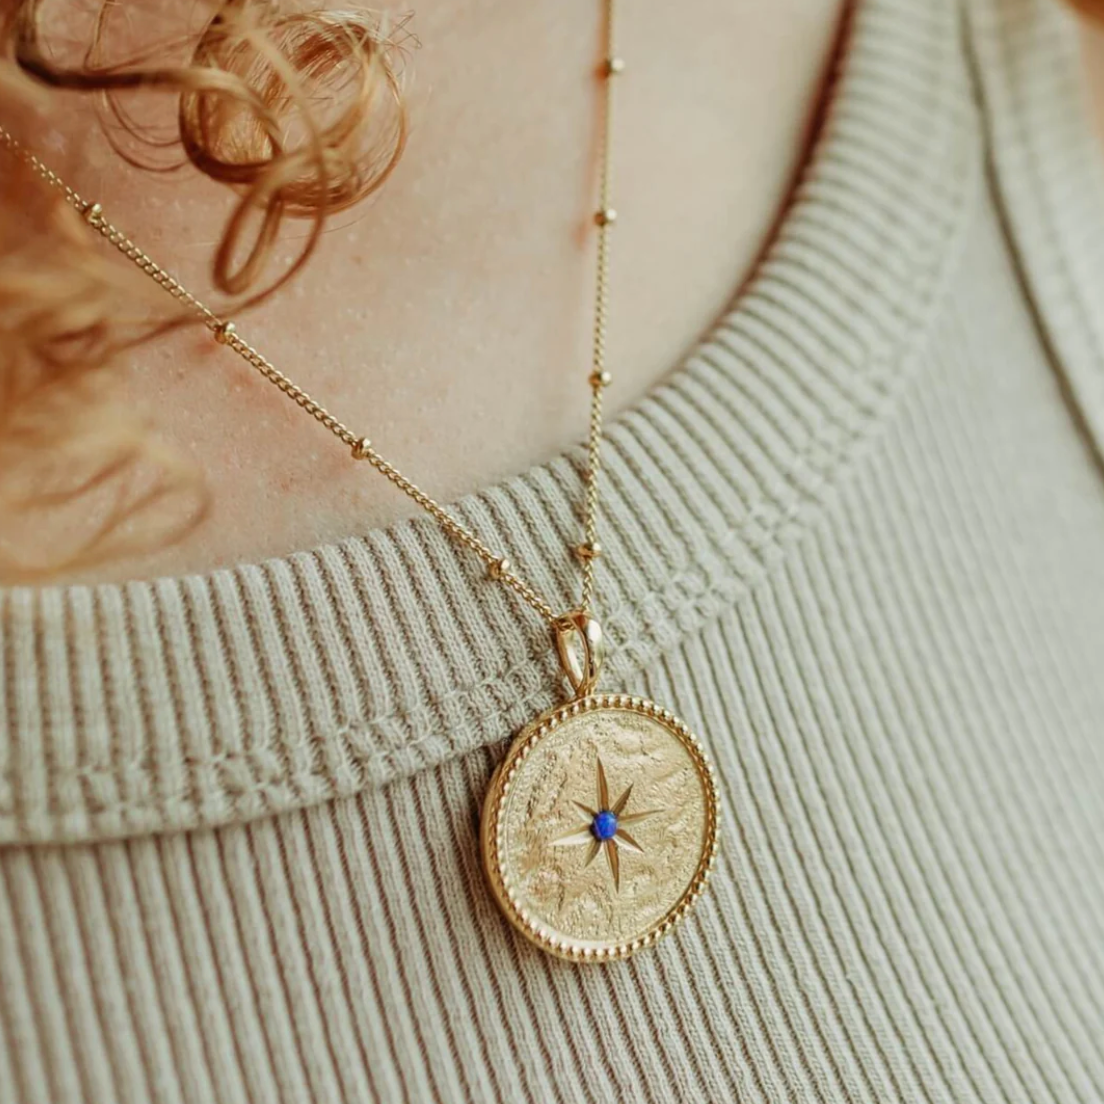 CLAIRE HILL DESIGNS "THRIVE" SHORTHAND COIN NECKLACE